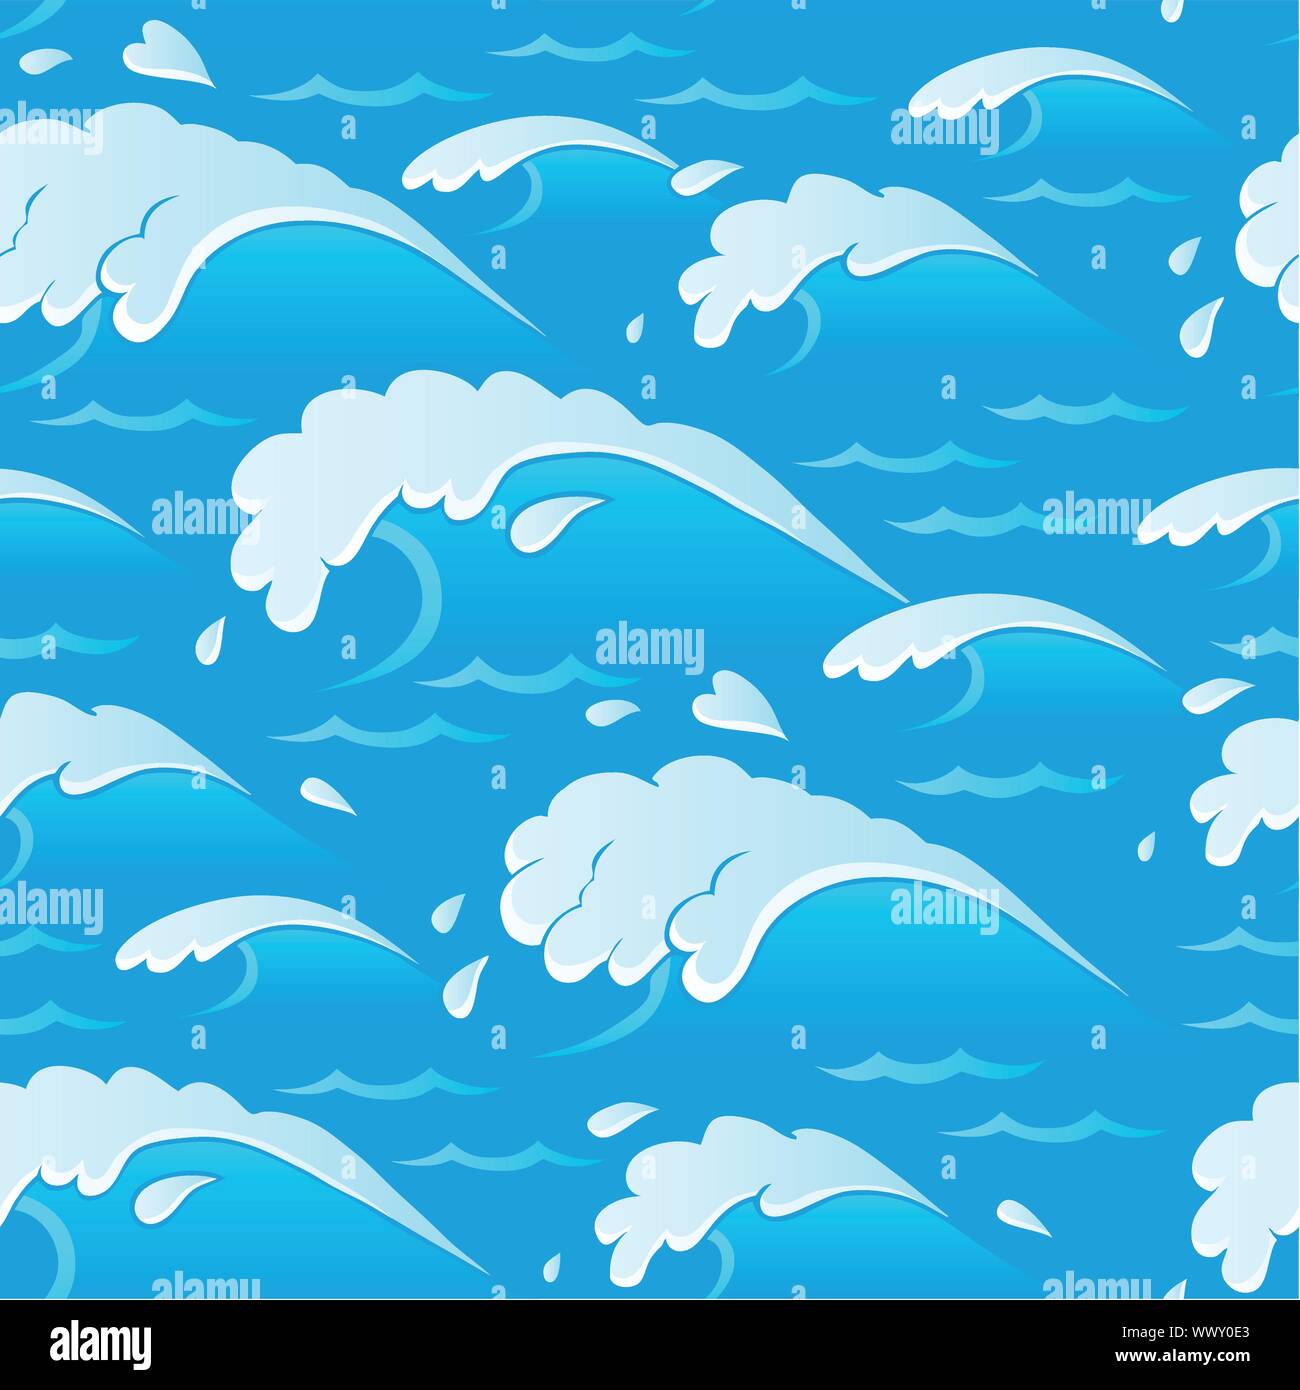 Waves theme seamless background 1 Stock Vector